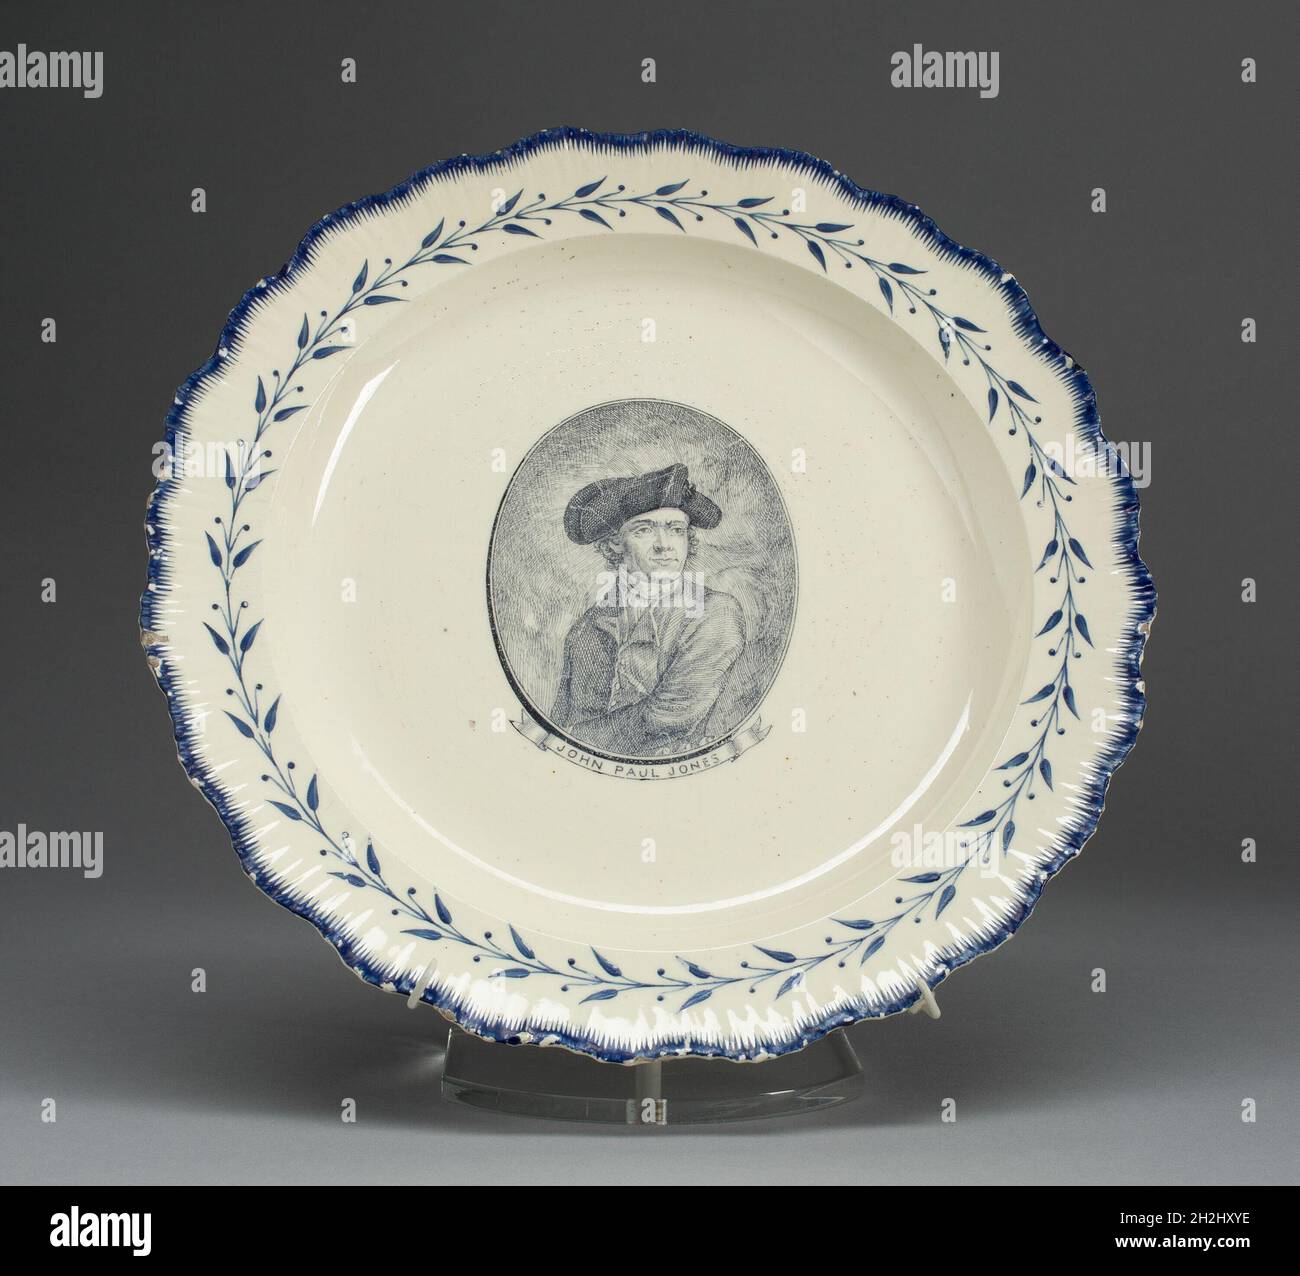 Plate, c. 1790. Stylised floral decoration with portrait of John Paul Jones. Made in Leeds, England, for the American market. Stock Photo